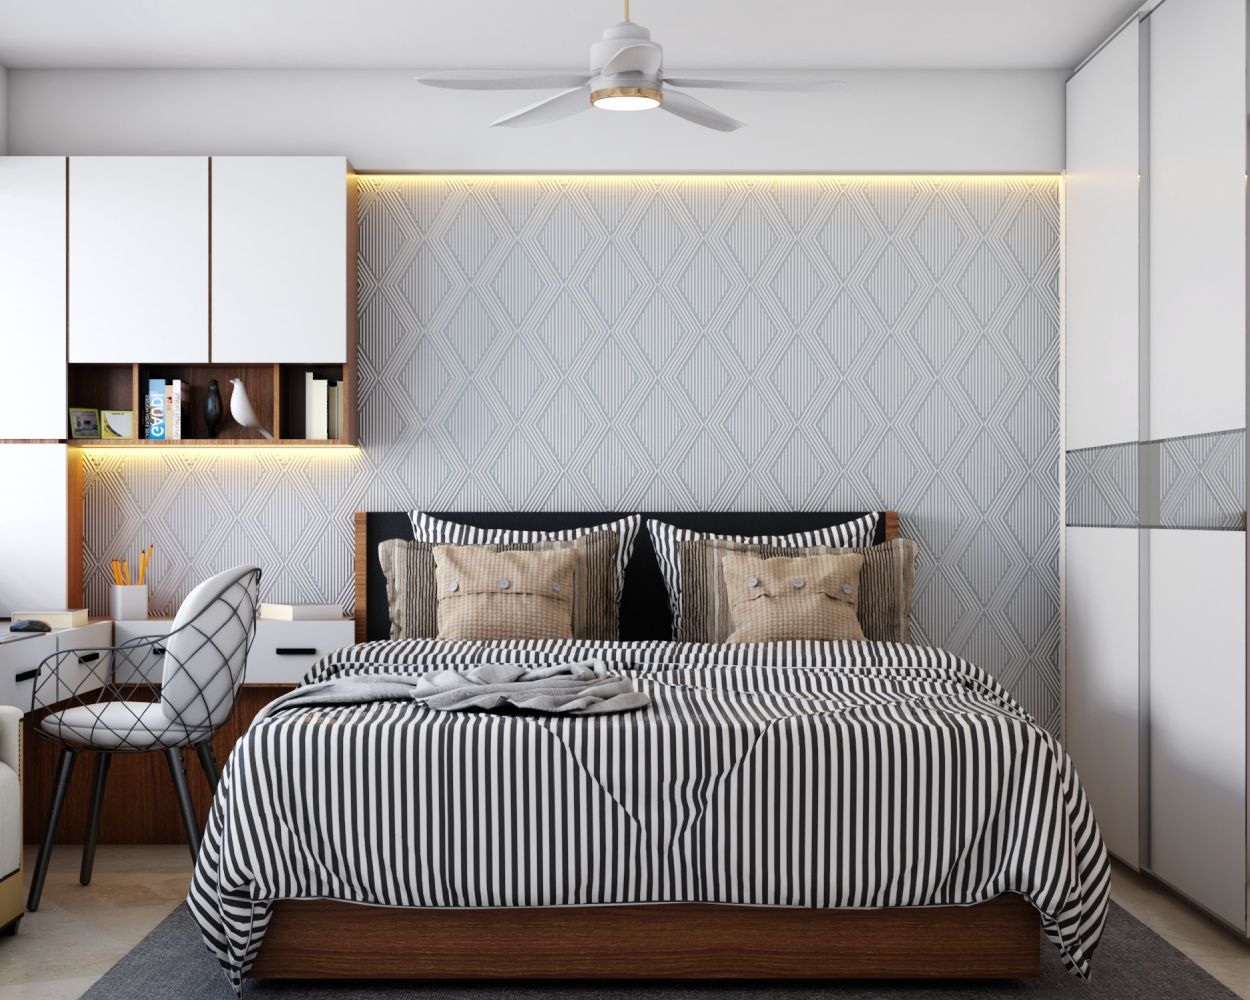 Modern Bedroom Wall Design With A Grey Wallpaper